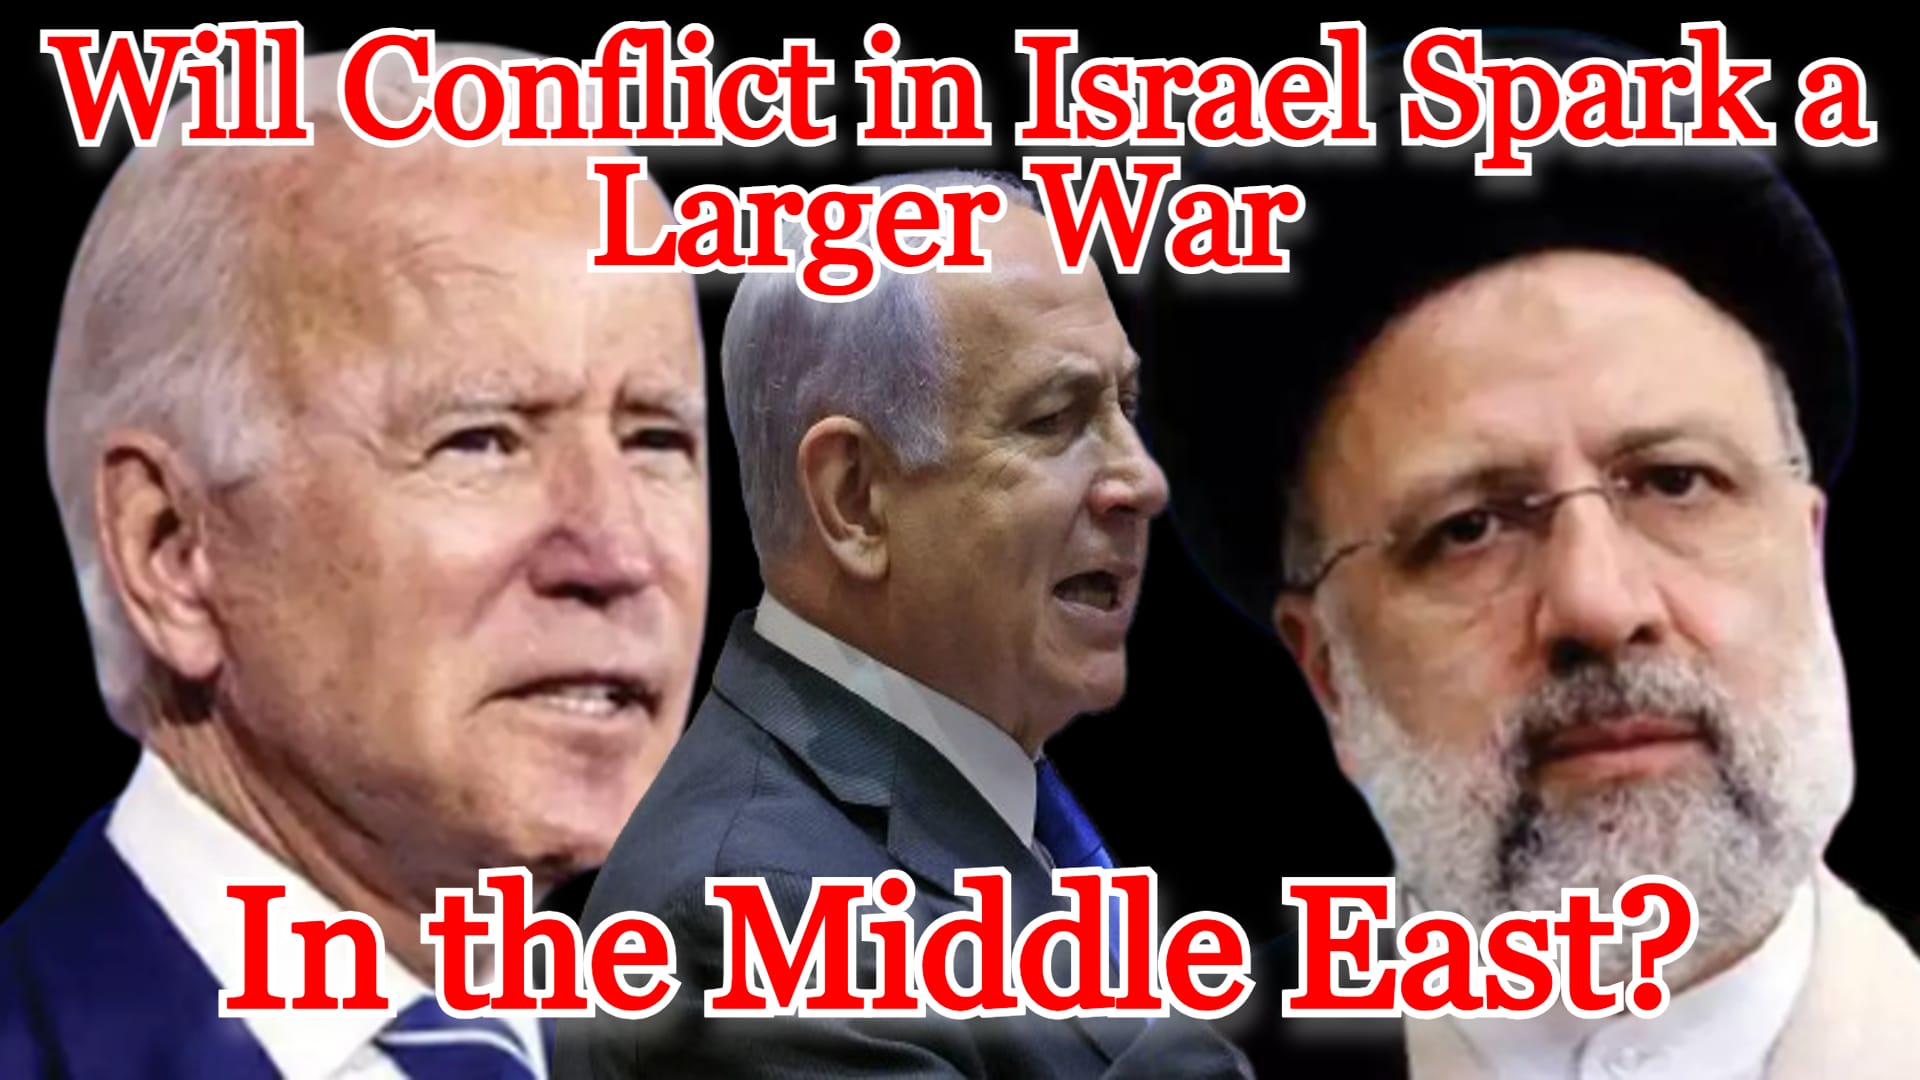 COI #483: Will Conflict in Israel Spark a Larger War in the Middle East?